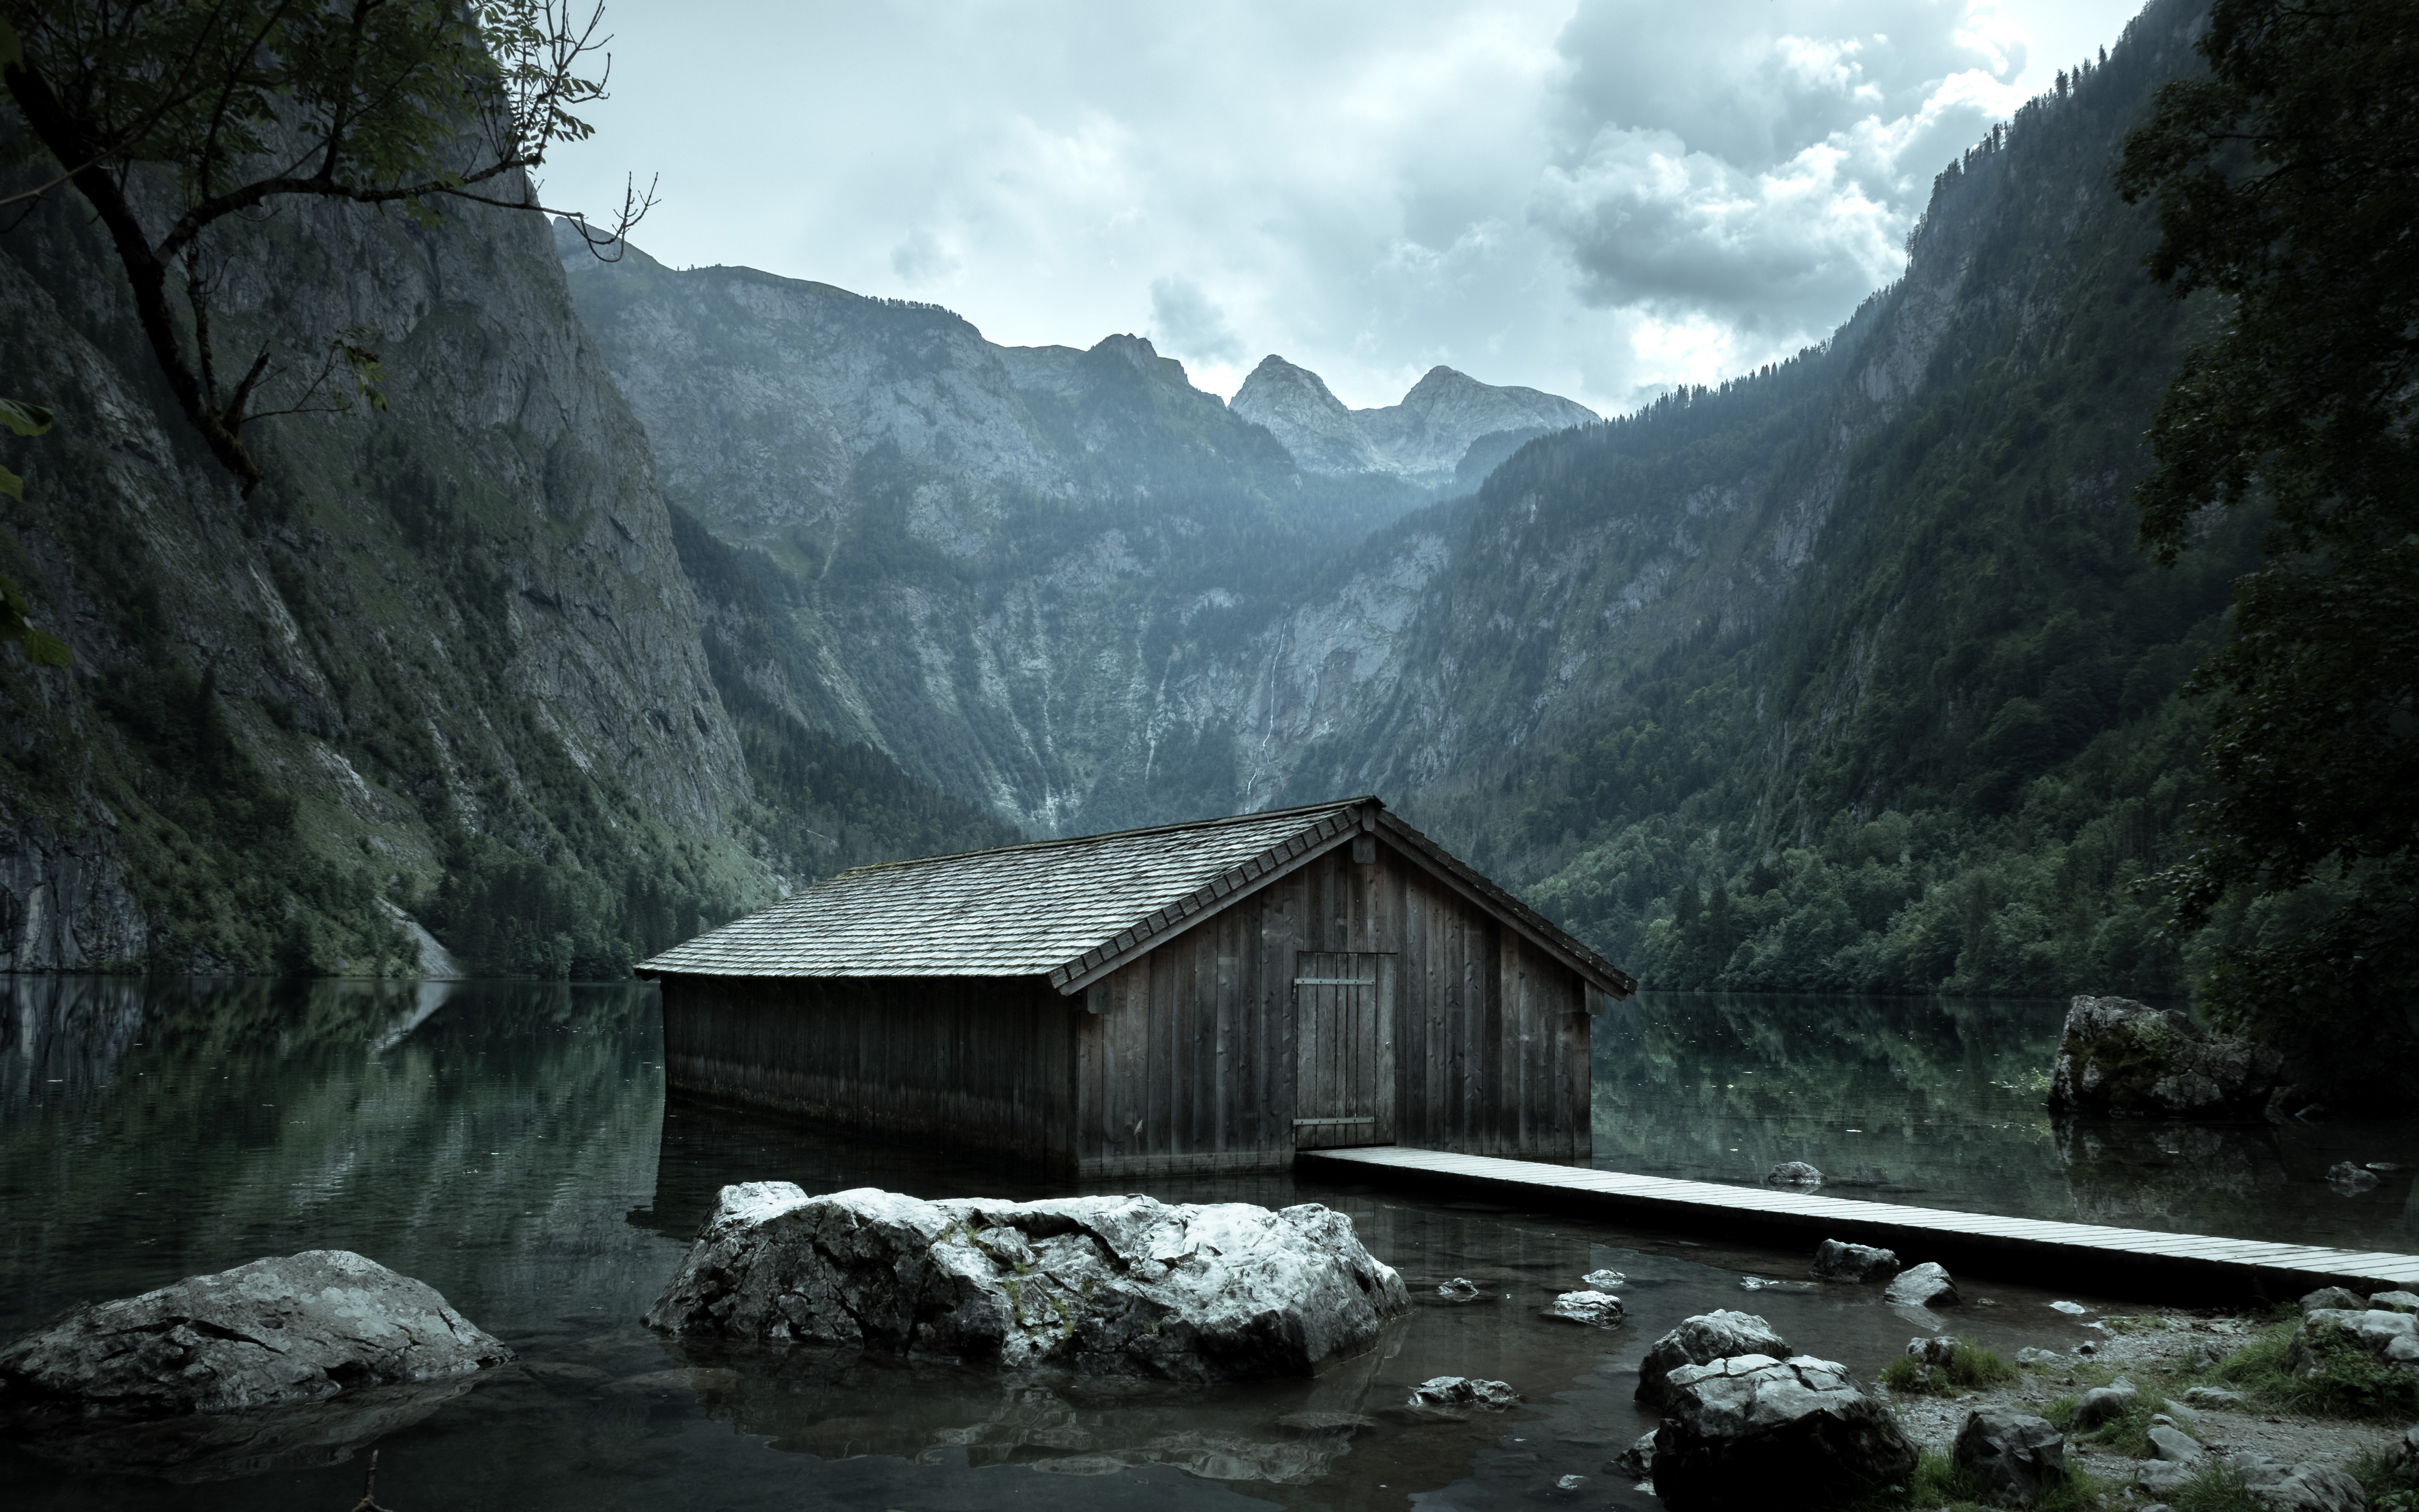 A wooden barn on a lake among the mountains in cloudy weather